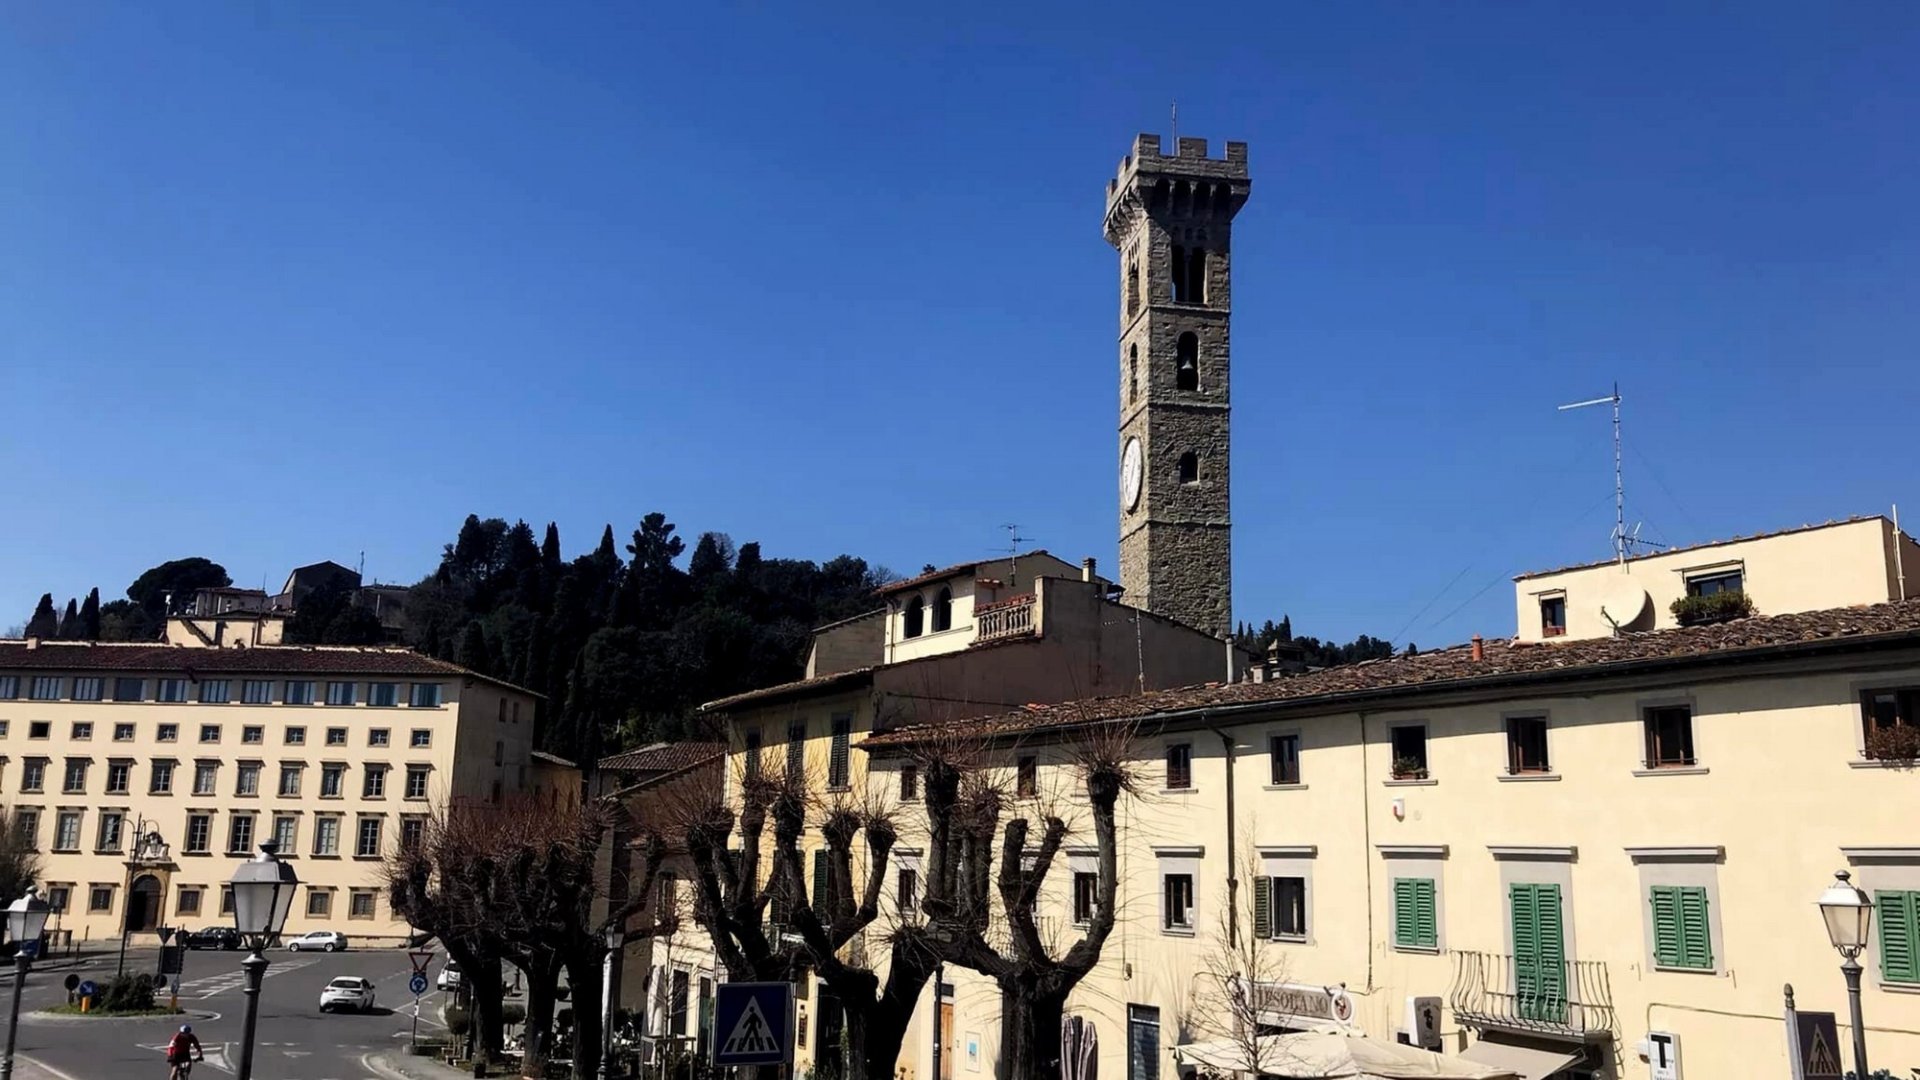 Tour of Fiesole, Monte Ceceri and the quarries of Maiano